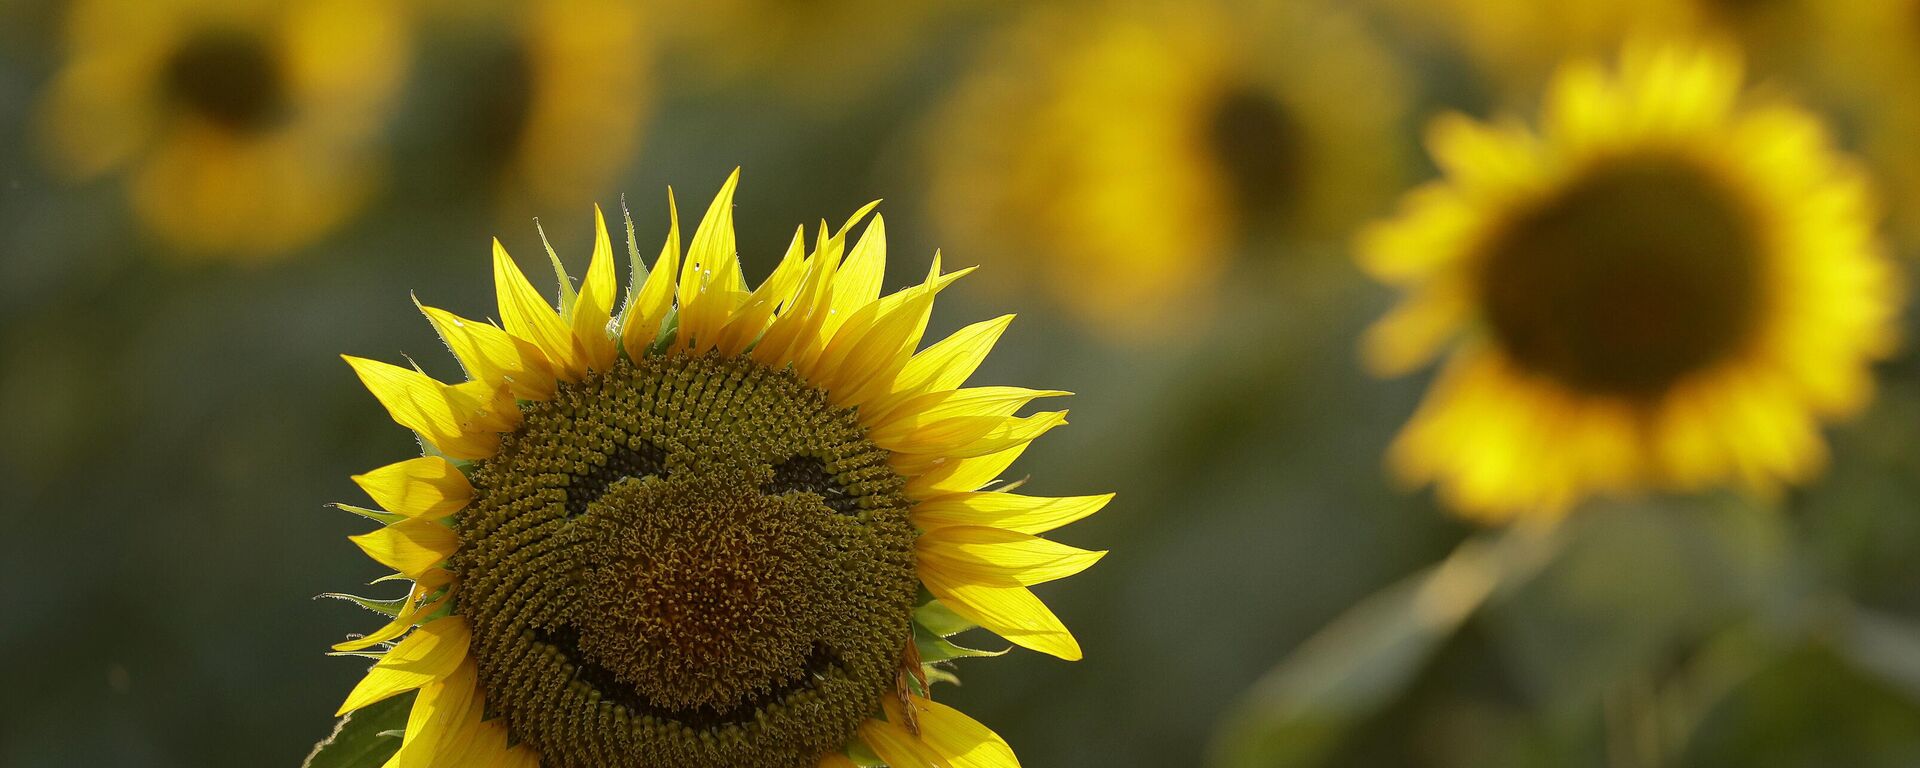 A smiley face is seen on a sunflower in a sunflower field Wednesday, Sept. 7, 2016, in Lawrence, Kan. The 40-acre field, planted annually by the Grinter family, draws thousands during the weeklong late summer blossoming of the flowers. - Sputnik International, 1920, 21.09.2023